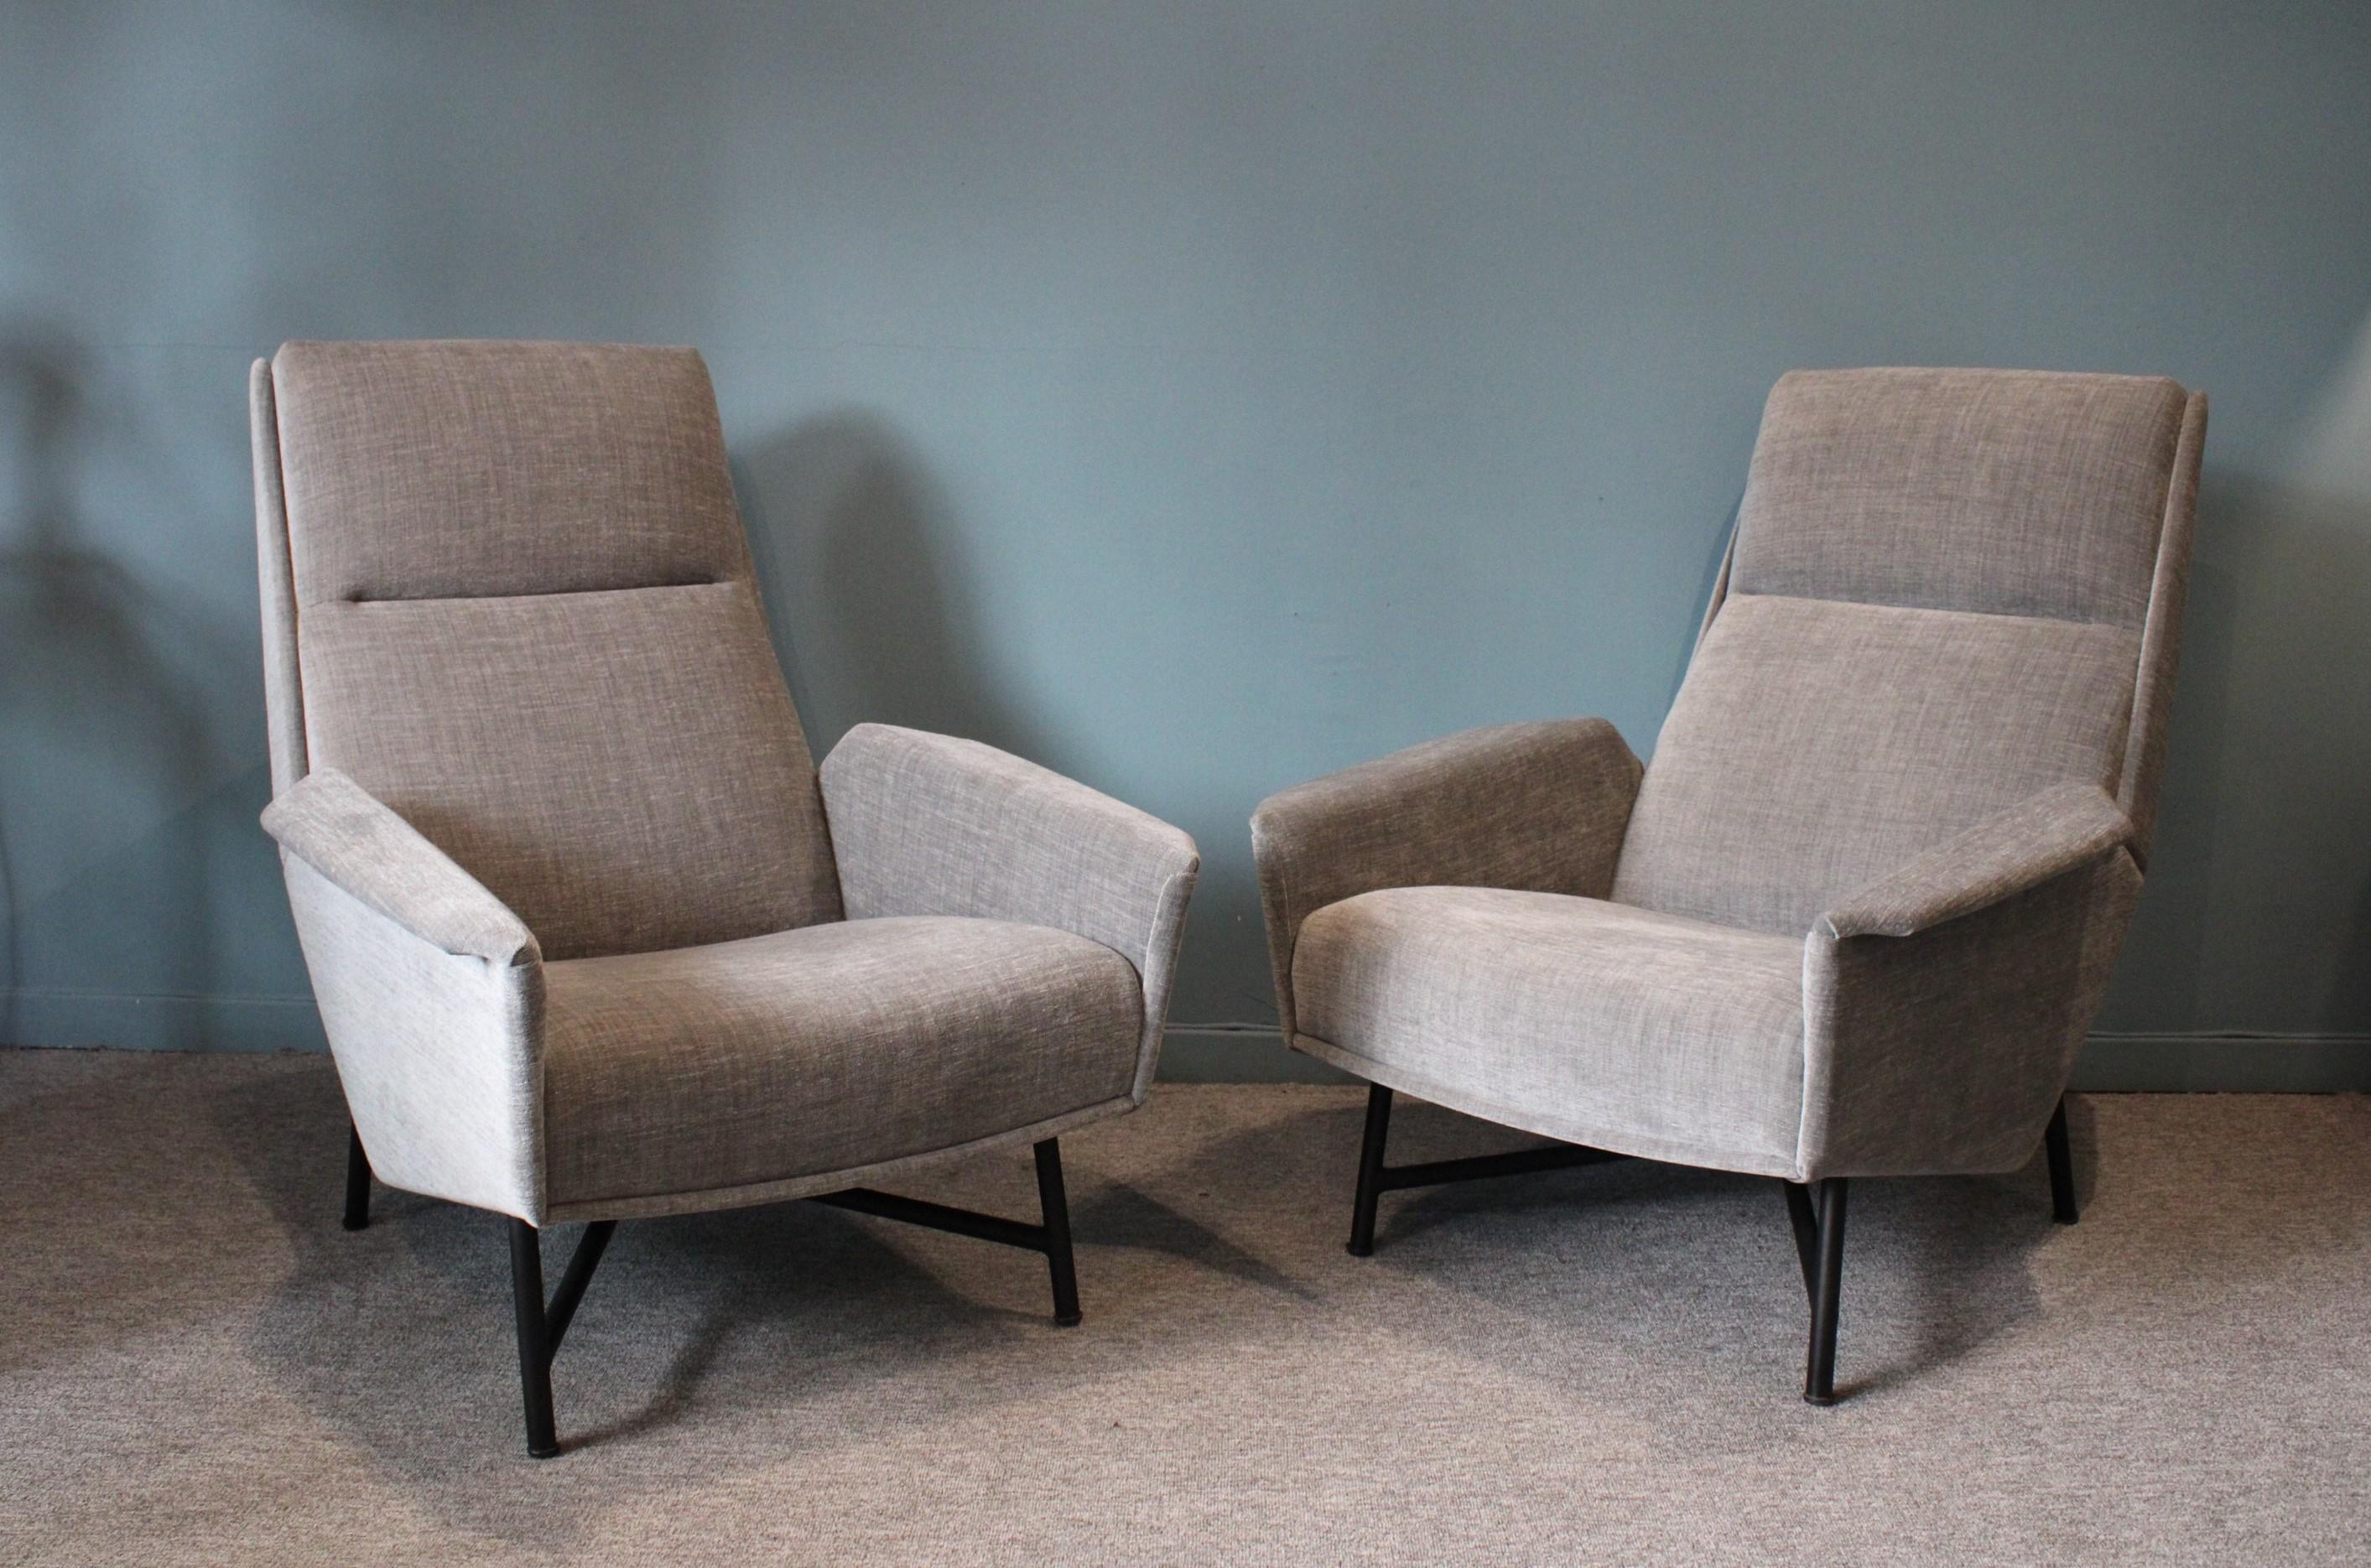 Pair of armchairs by Claude Delor, circa 1950.
V-shaped armrests resting on a tubular black metal base, re-upholstered with a fabric from the house of Brisson Bruneel.
Measures: Seat depth: 47 cm
Seat height: 67 cm.